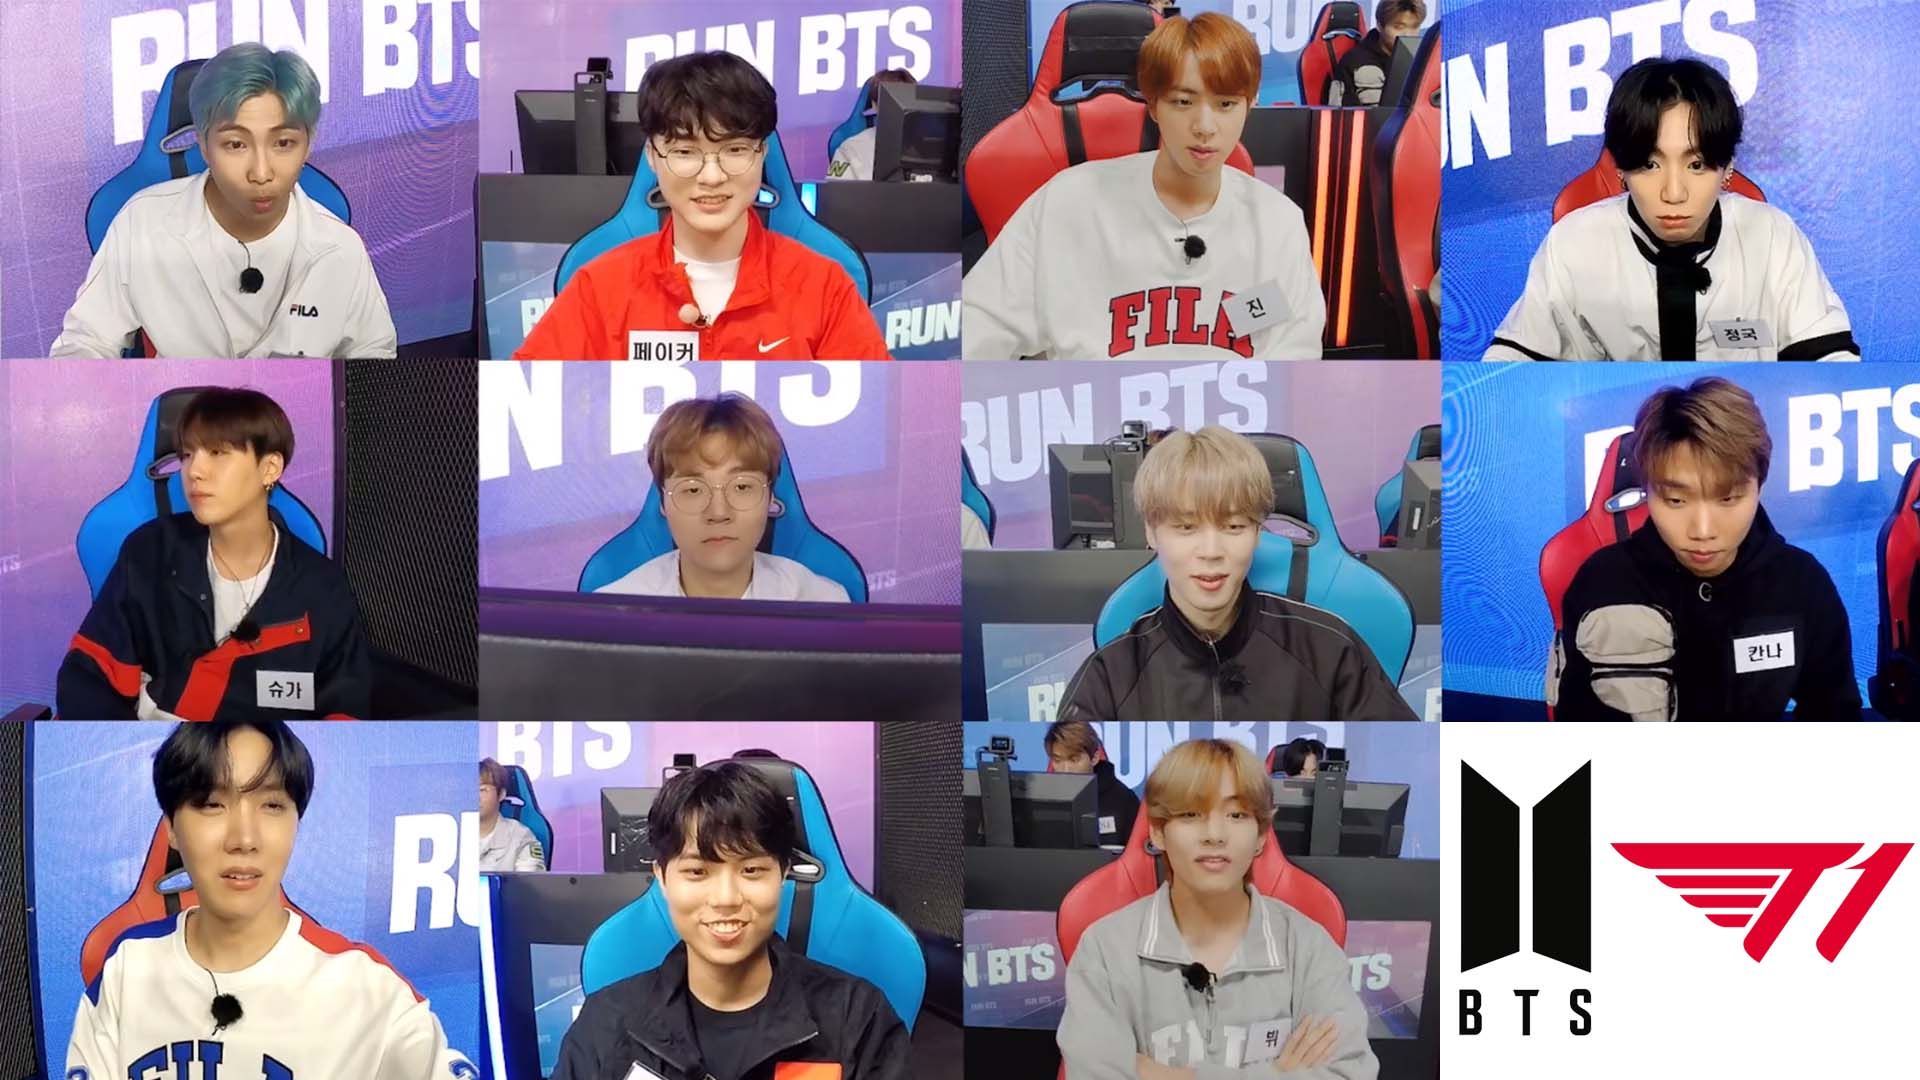 The 5 best moments from T1's appearance on Run BTS